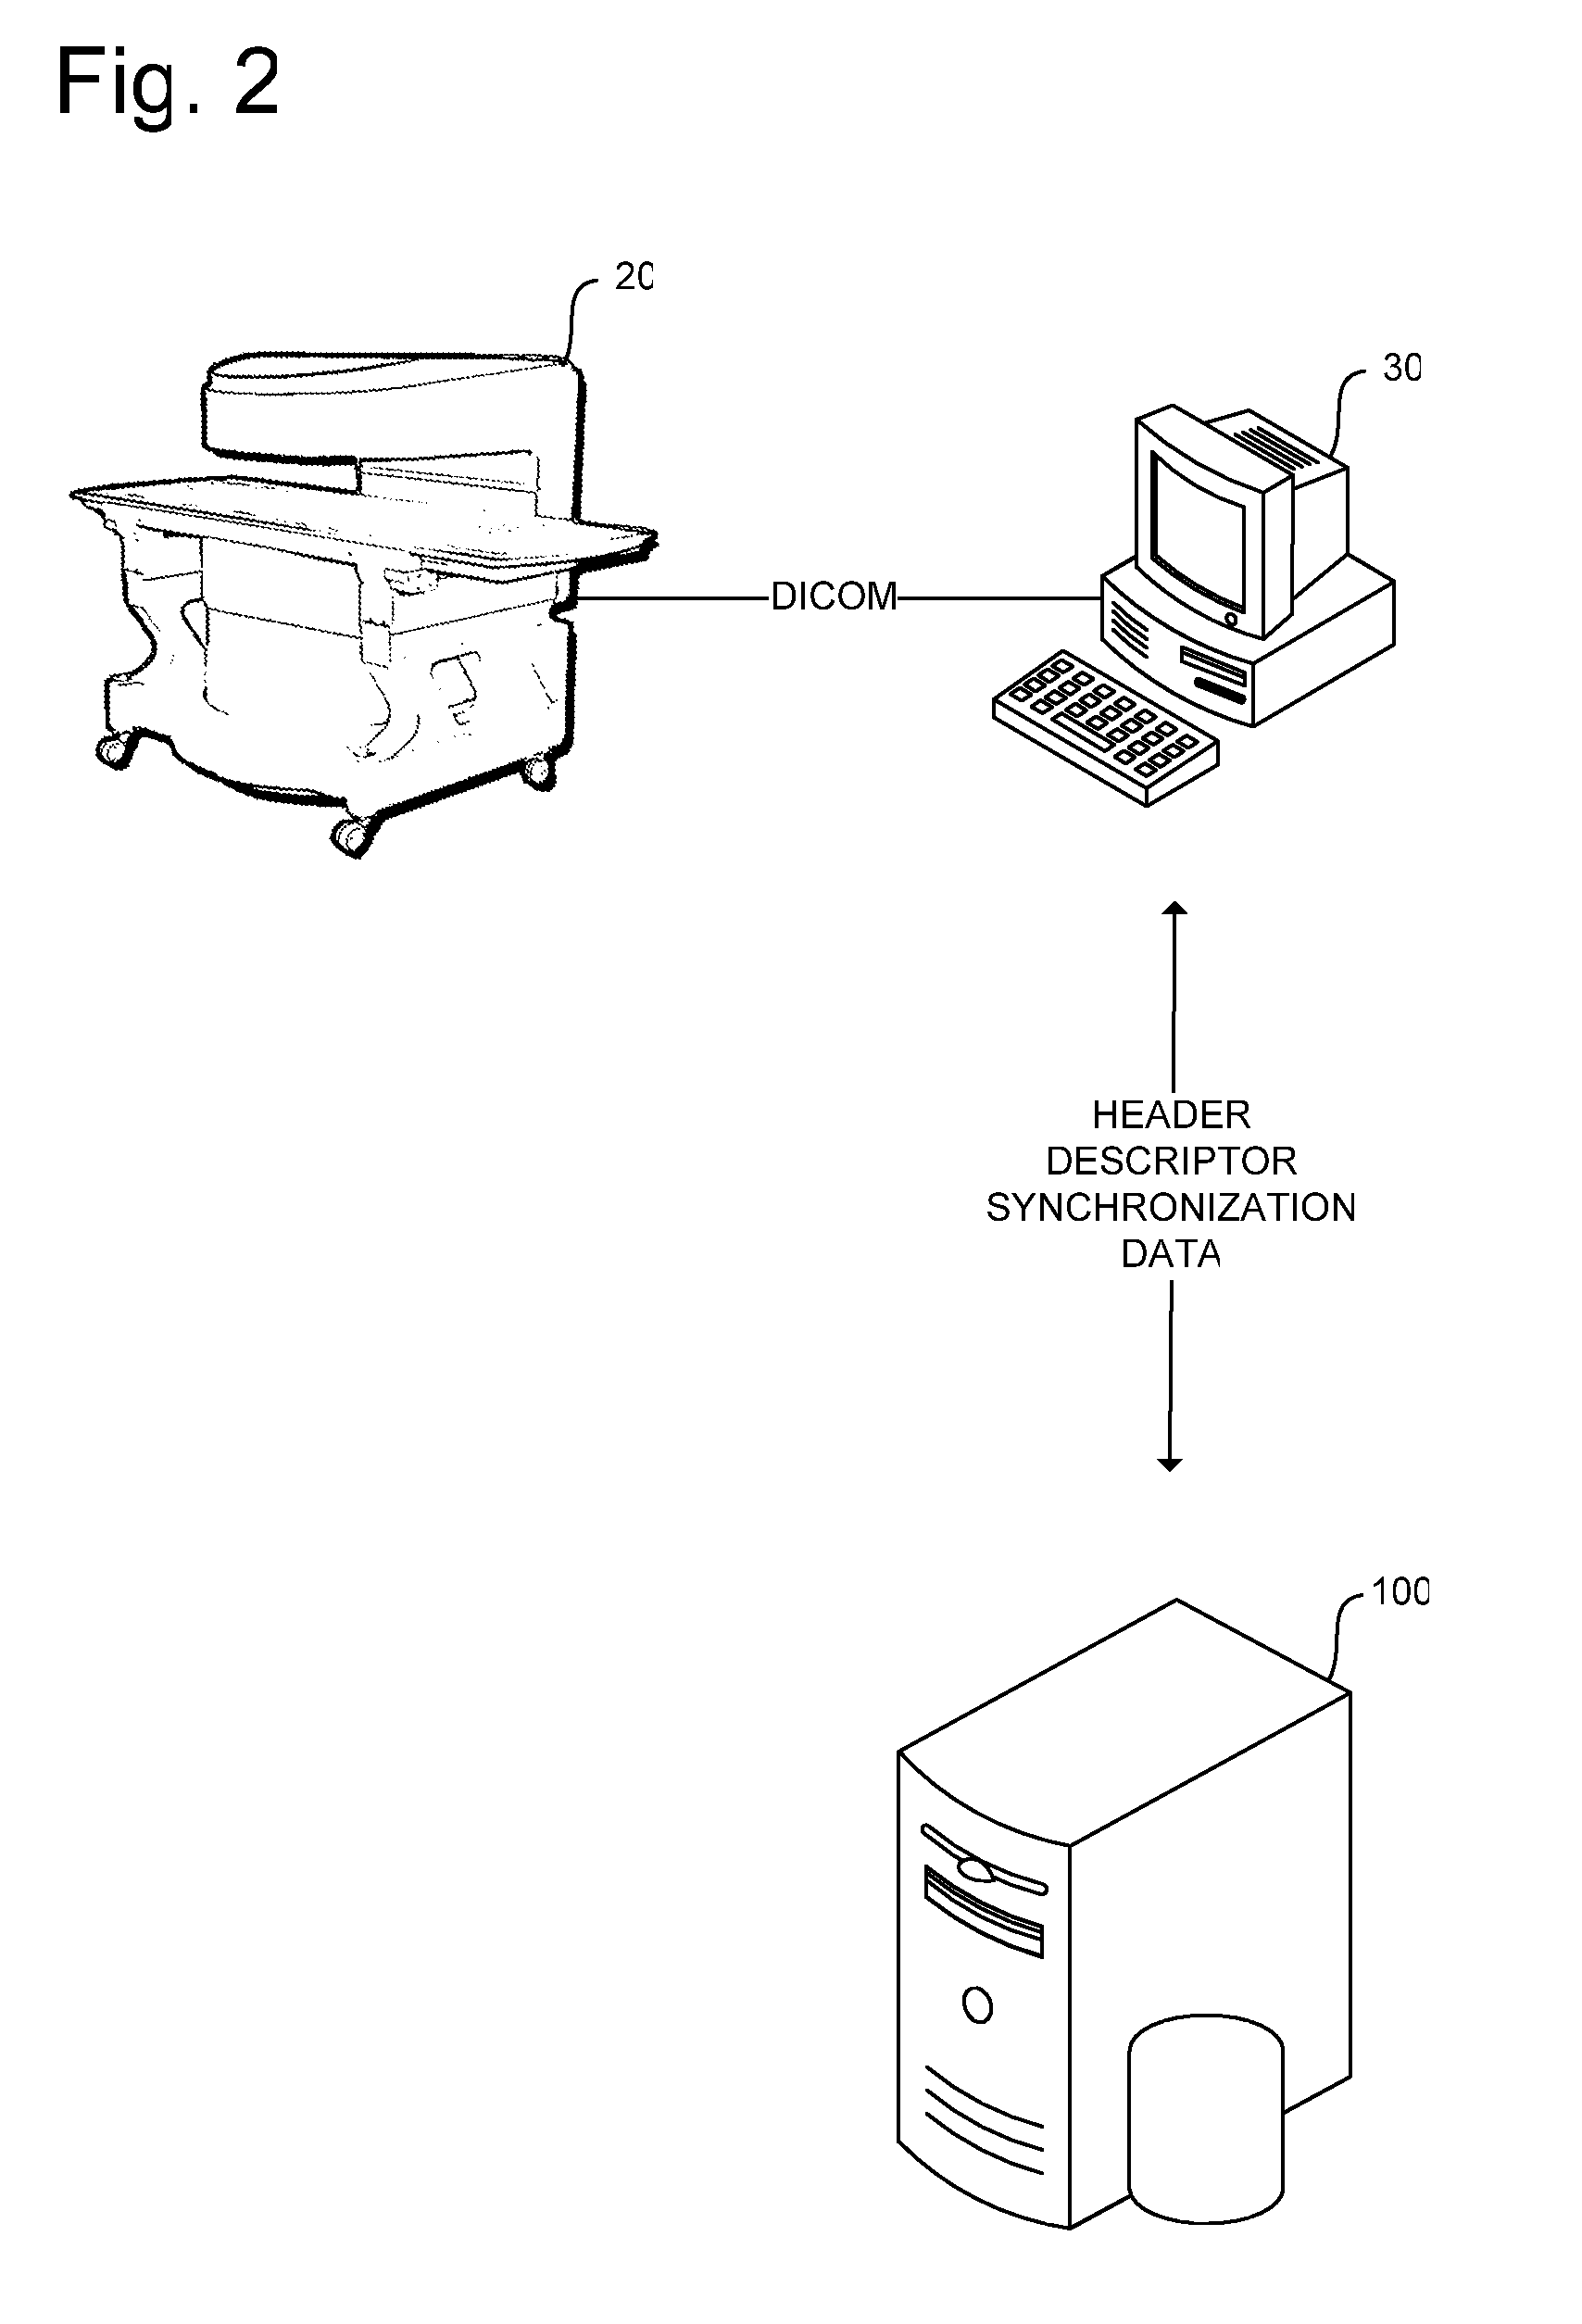 Method for the integration of medical imaging data and content for wireless transmission and remote viewing